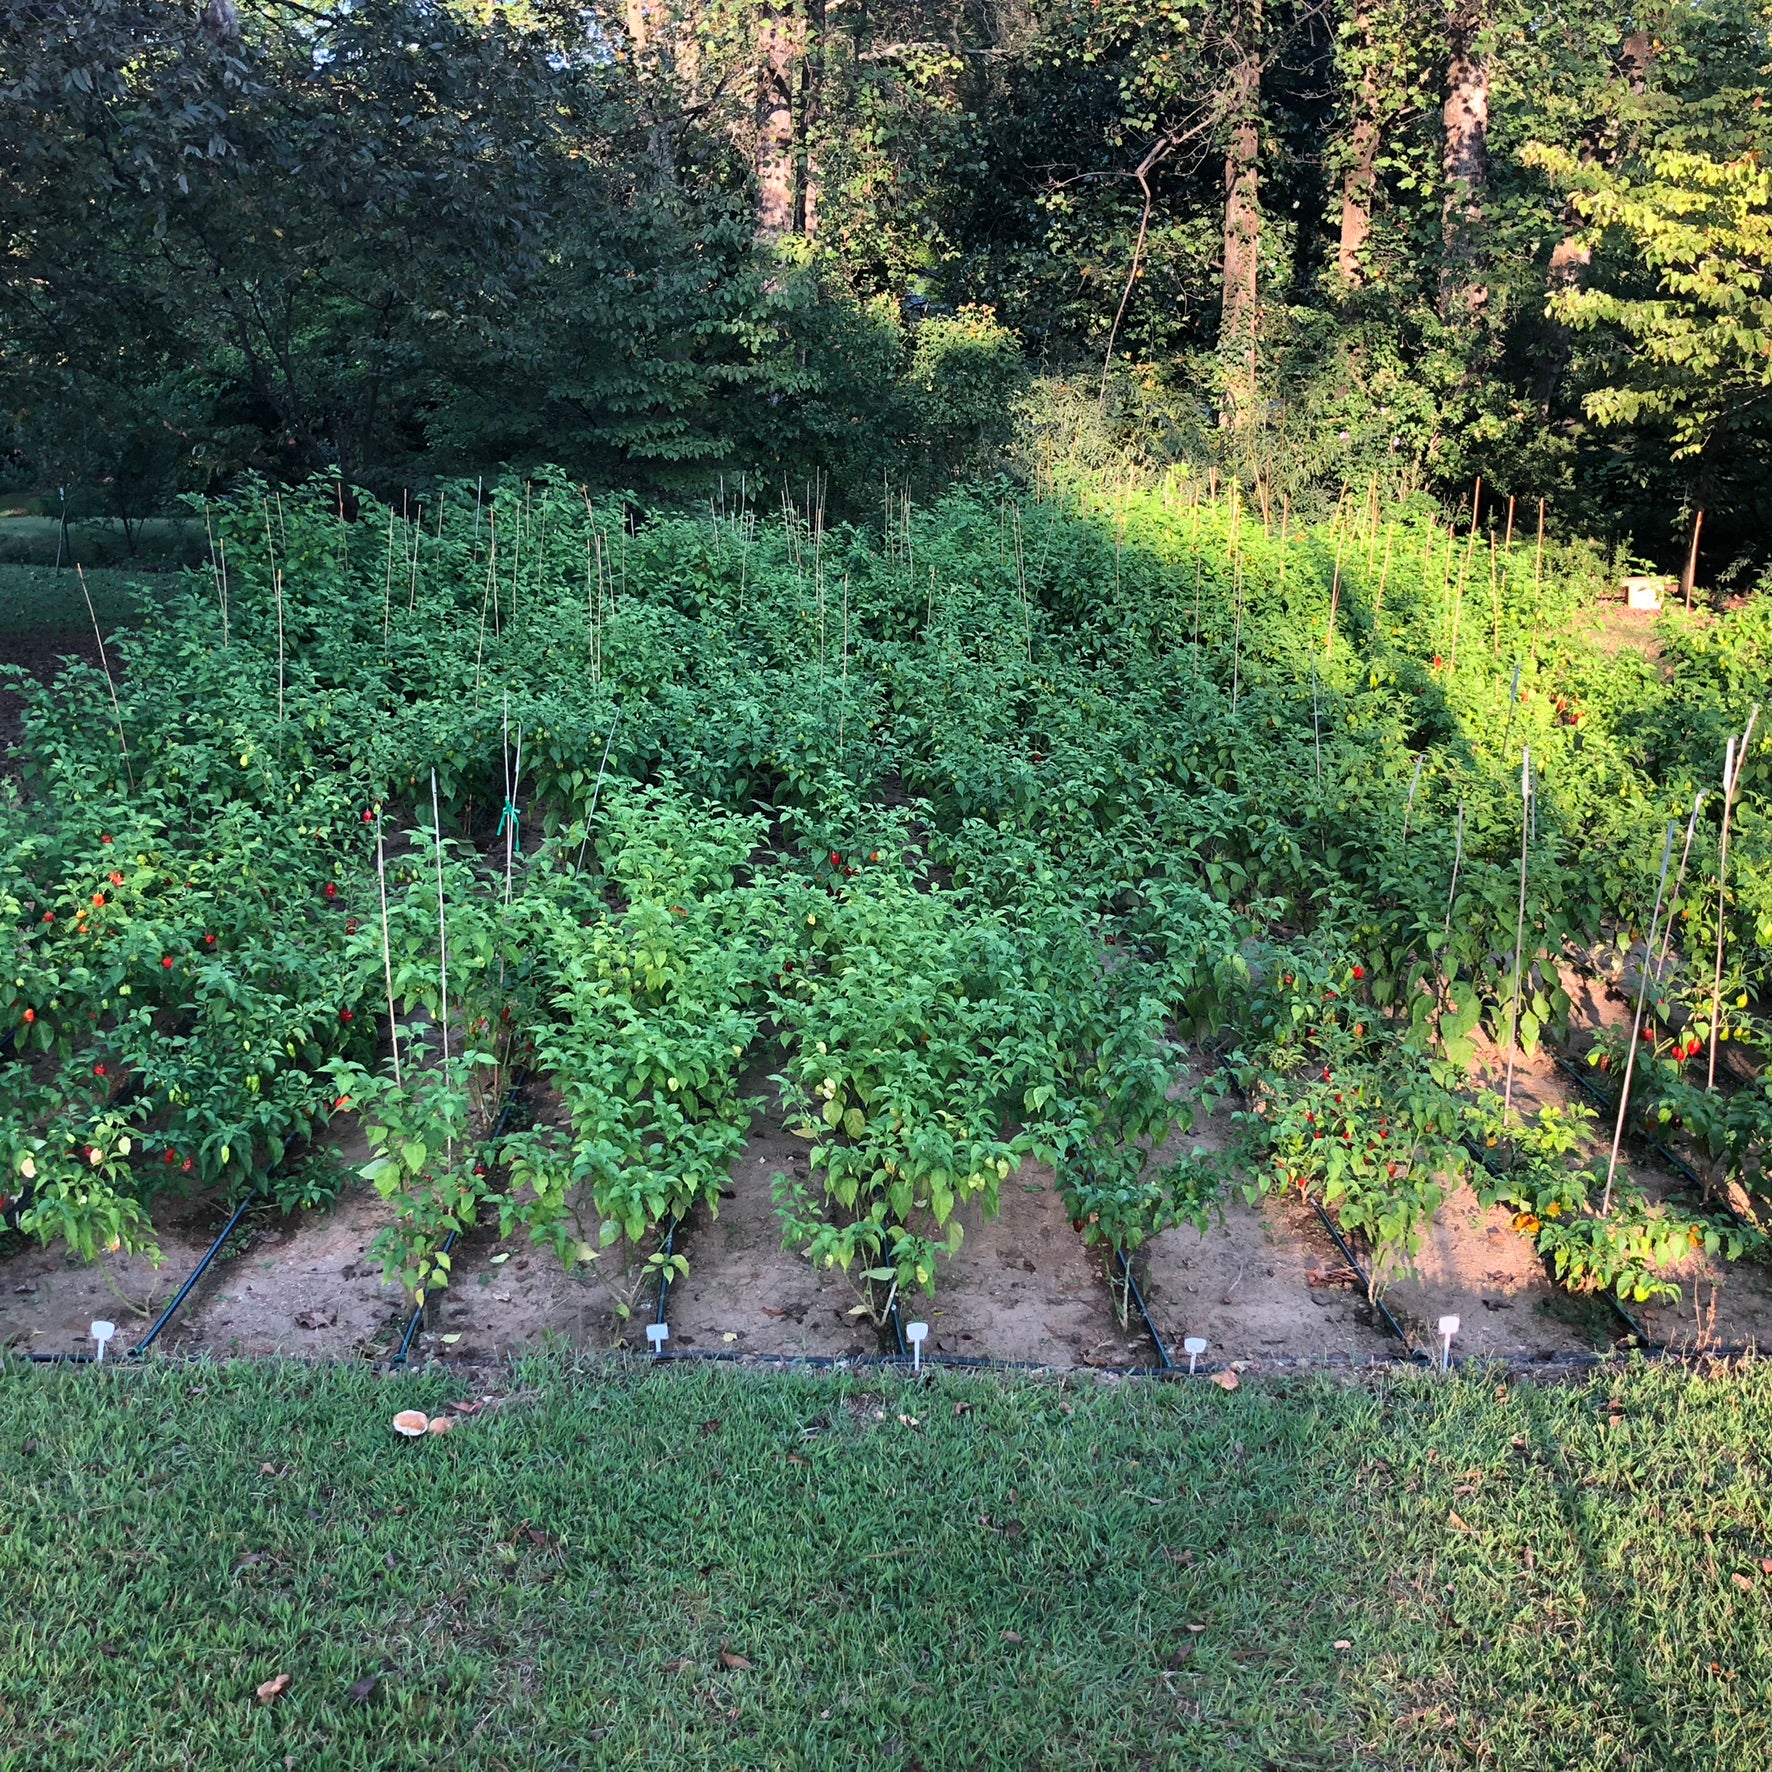 10/12/2018 – Pepper Farm Update – Fresh Peppers are in their prime, but the season is nearing an end.